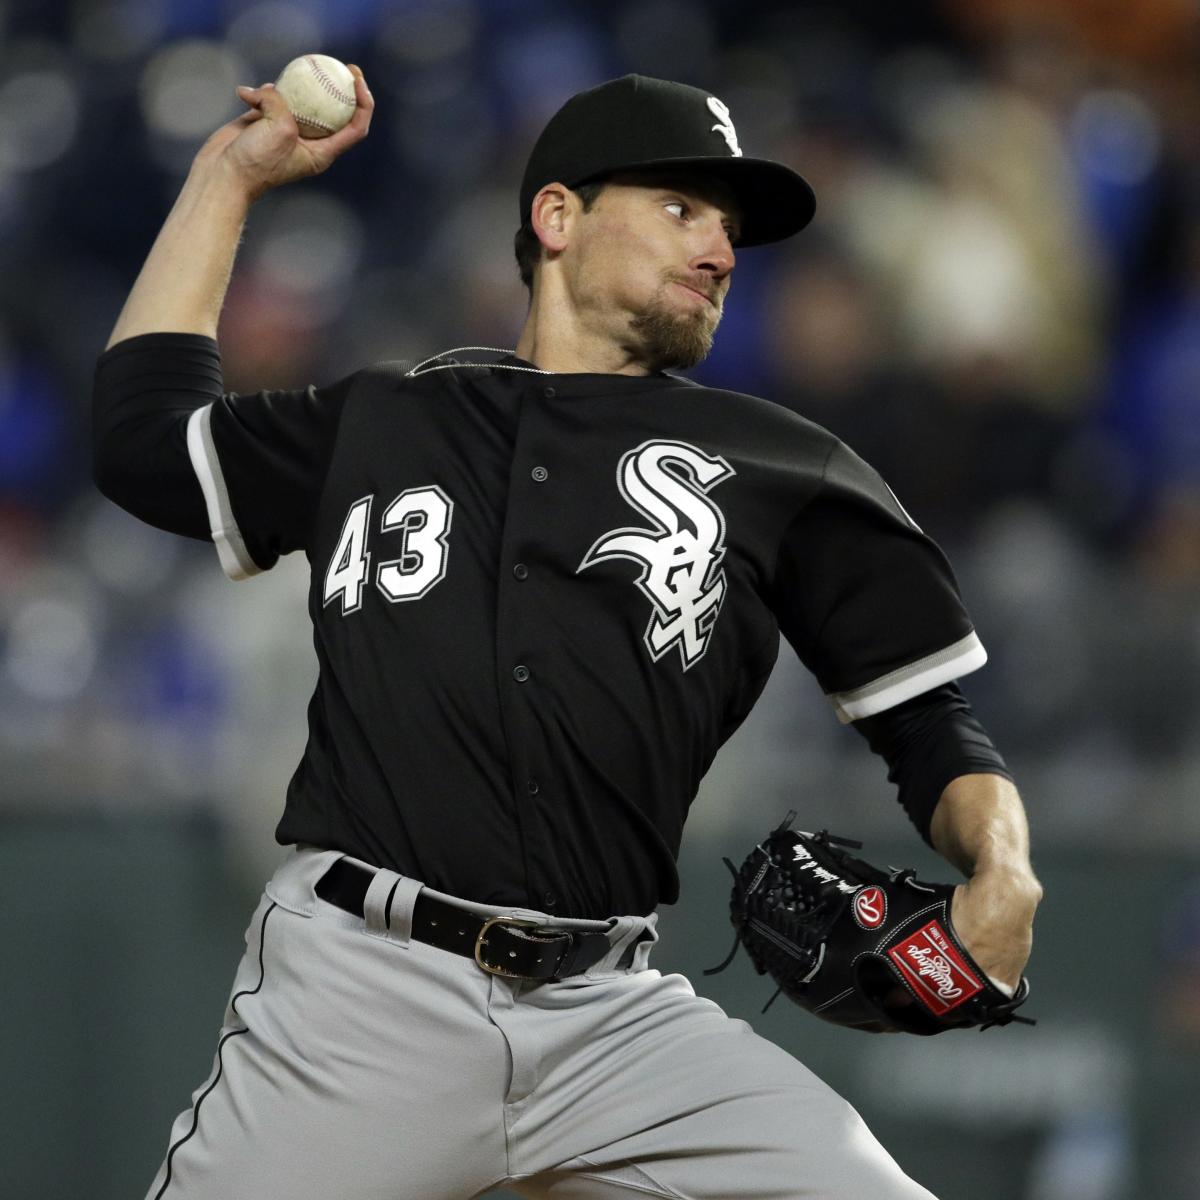 Danny Farquhar finds niche as pitching coach in White Sox' farm